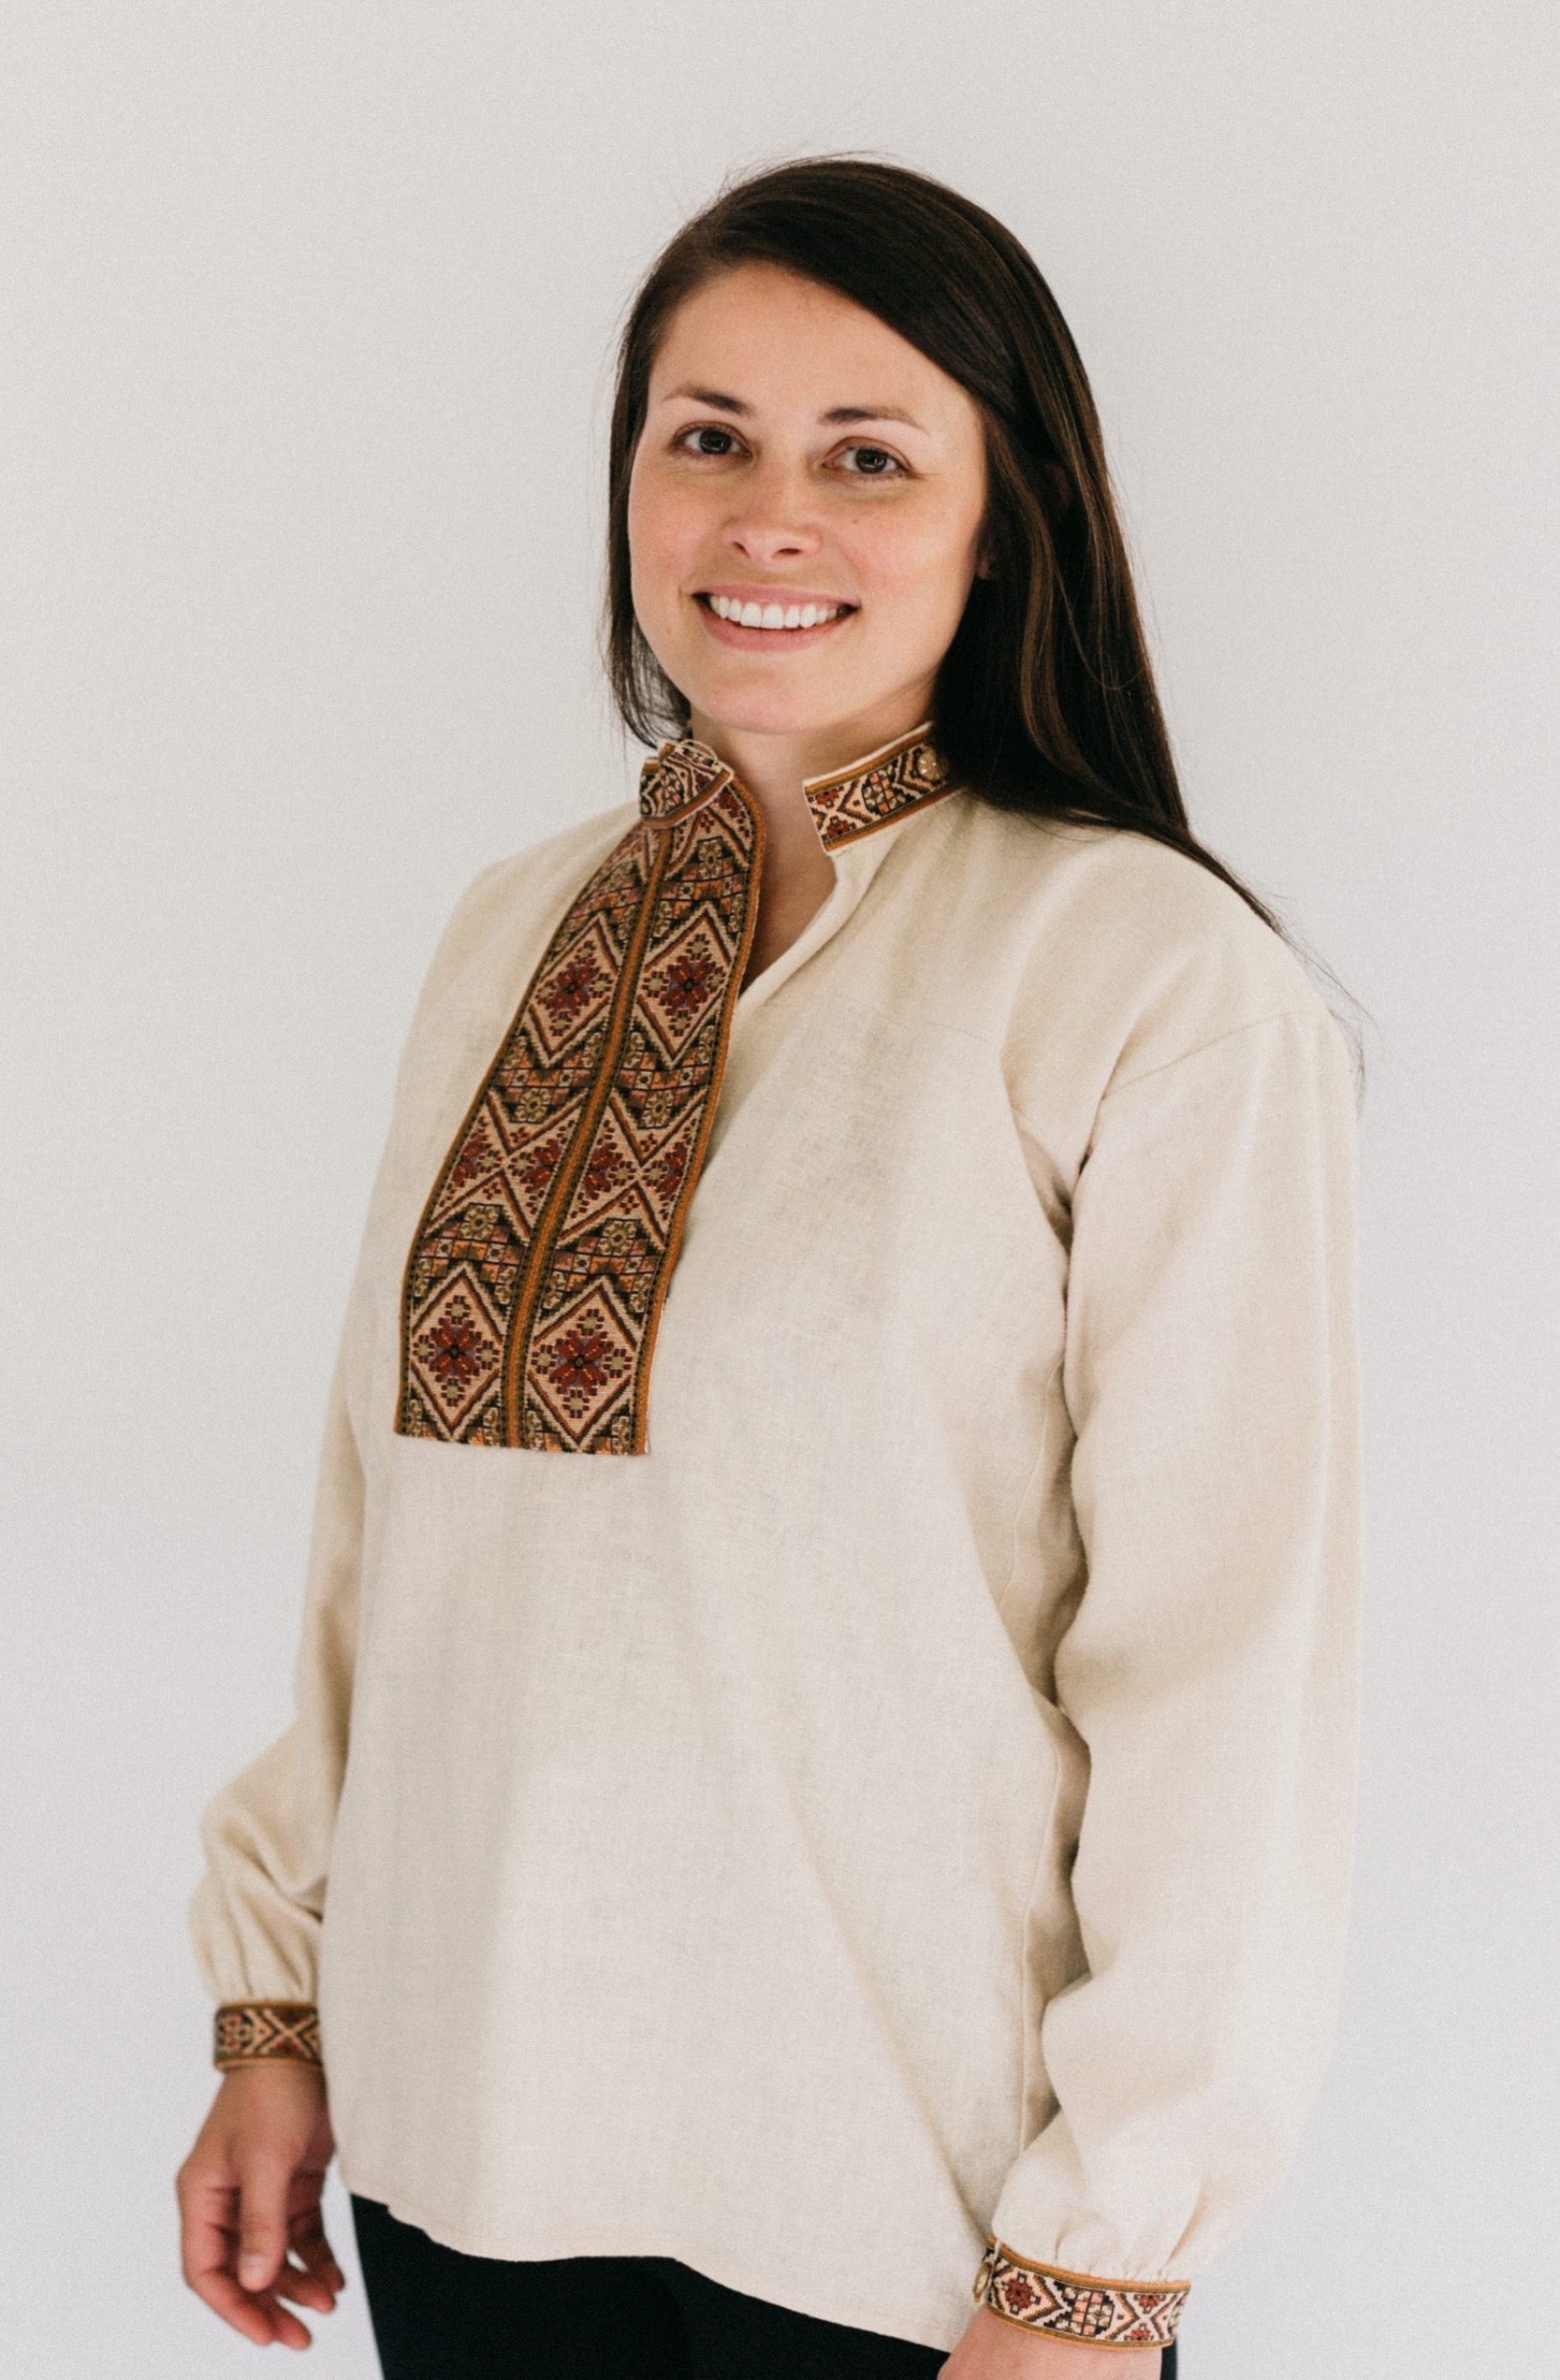 Woman wearing View B with embroidered neck opening and sleeve cuffs.  Shirt is unbuttoned to show side neck opening.